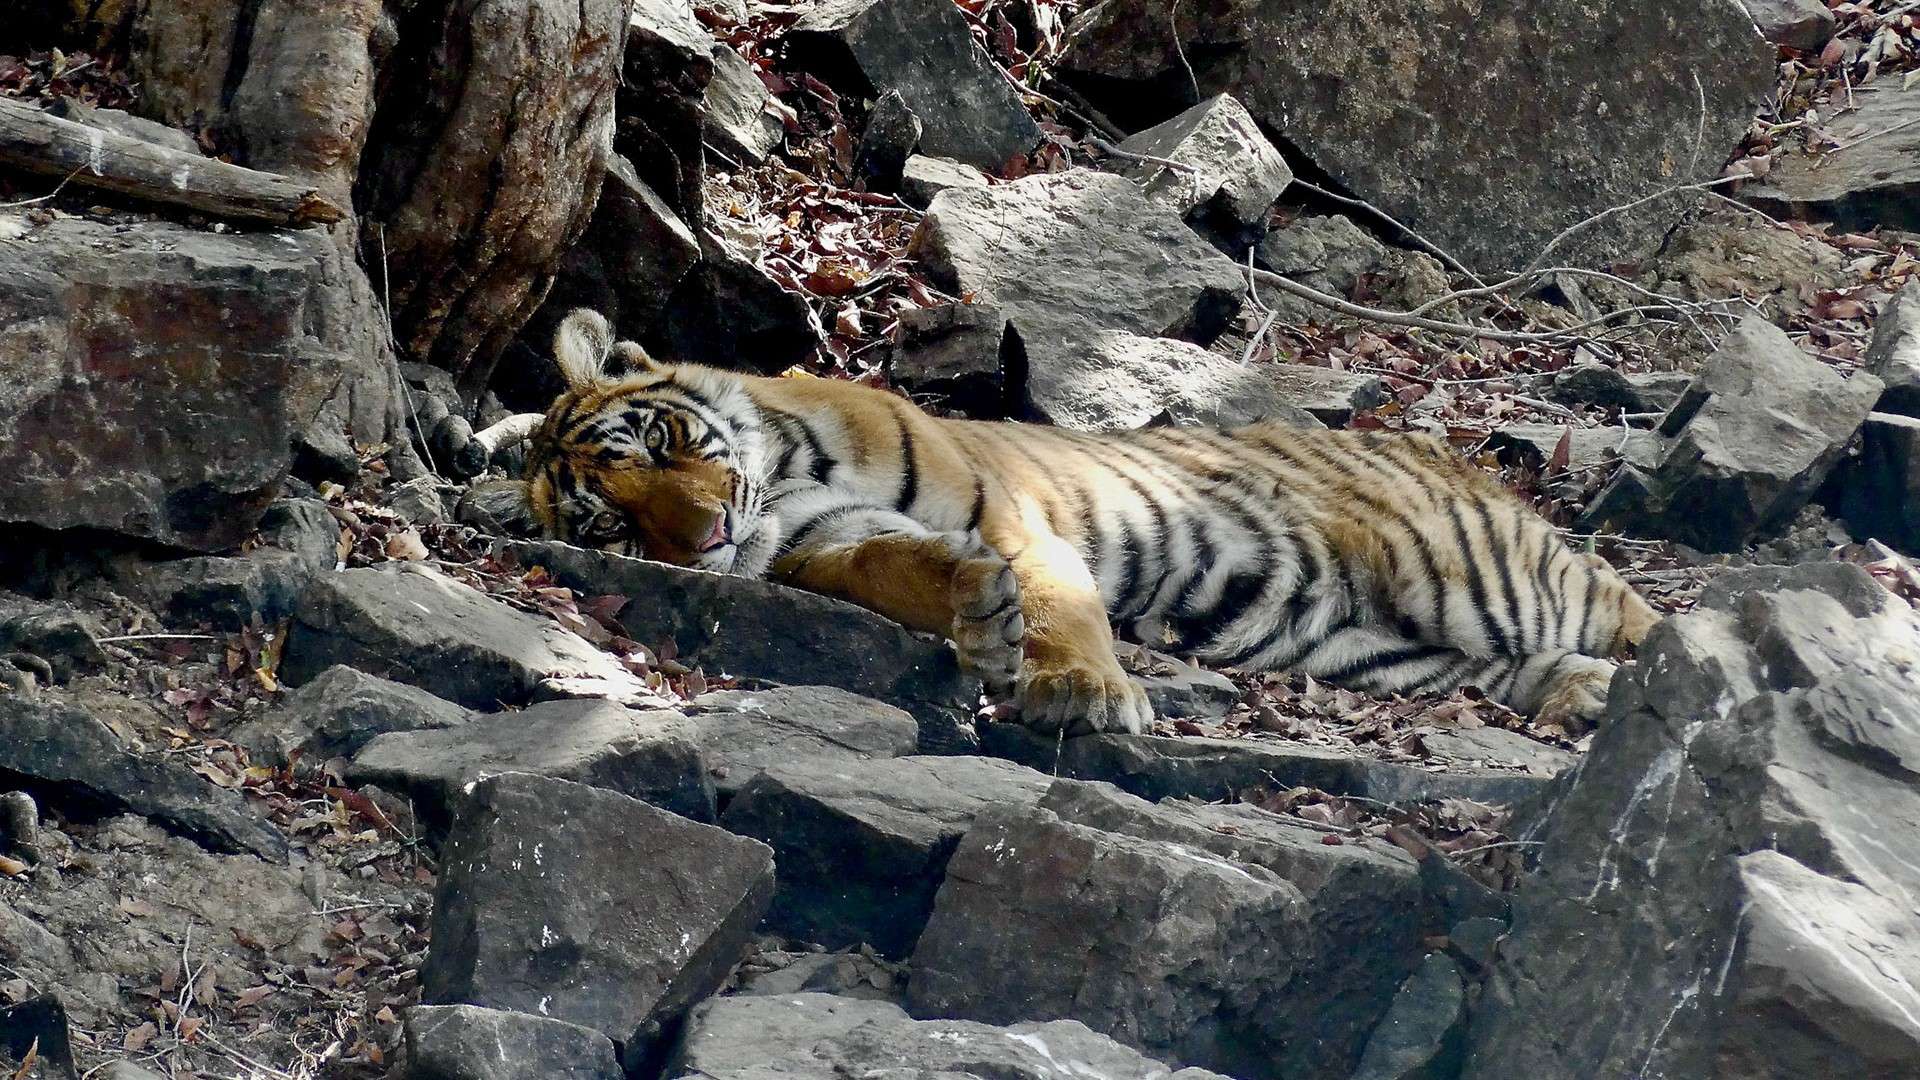 Tiger laying on rocks in India by Harry Bosen